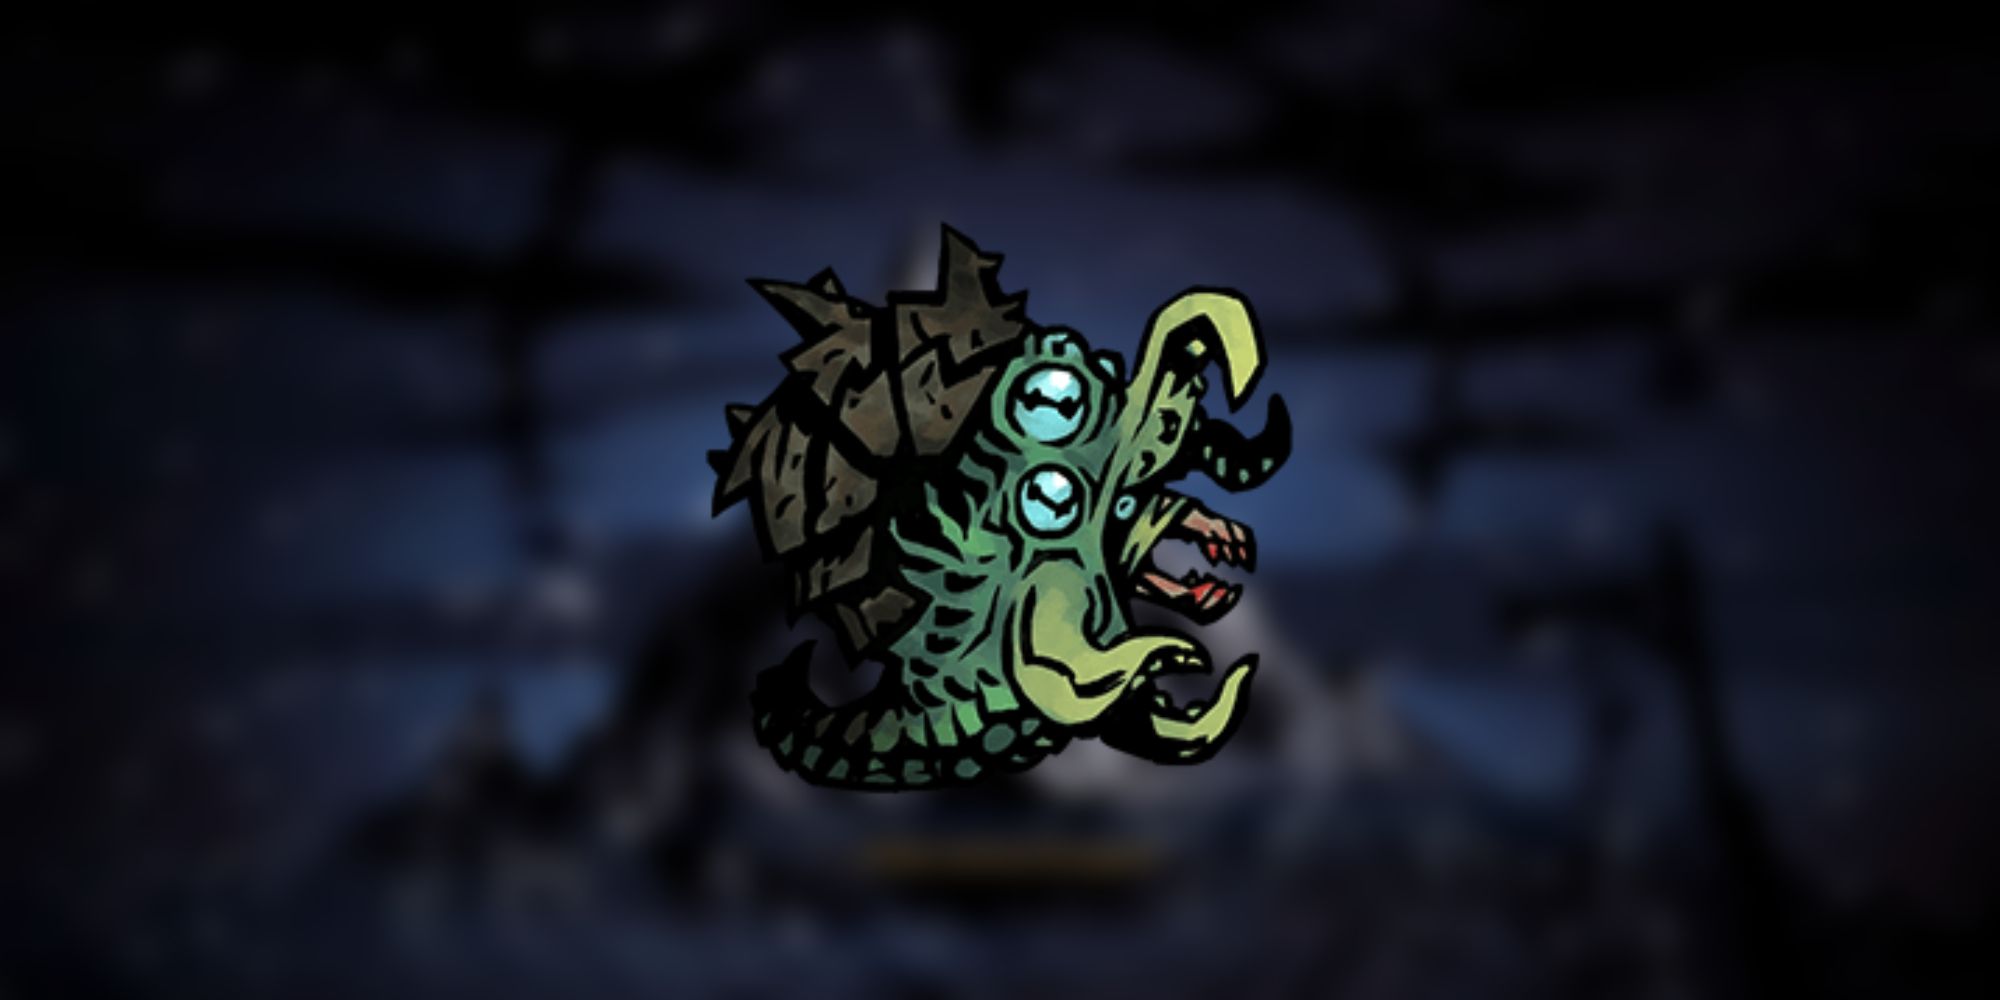 A screenshot of the Larval Carrion Eater Pet from Darkest Dungeon 2